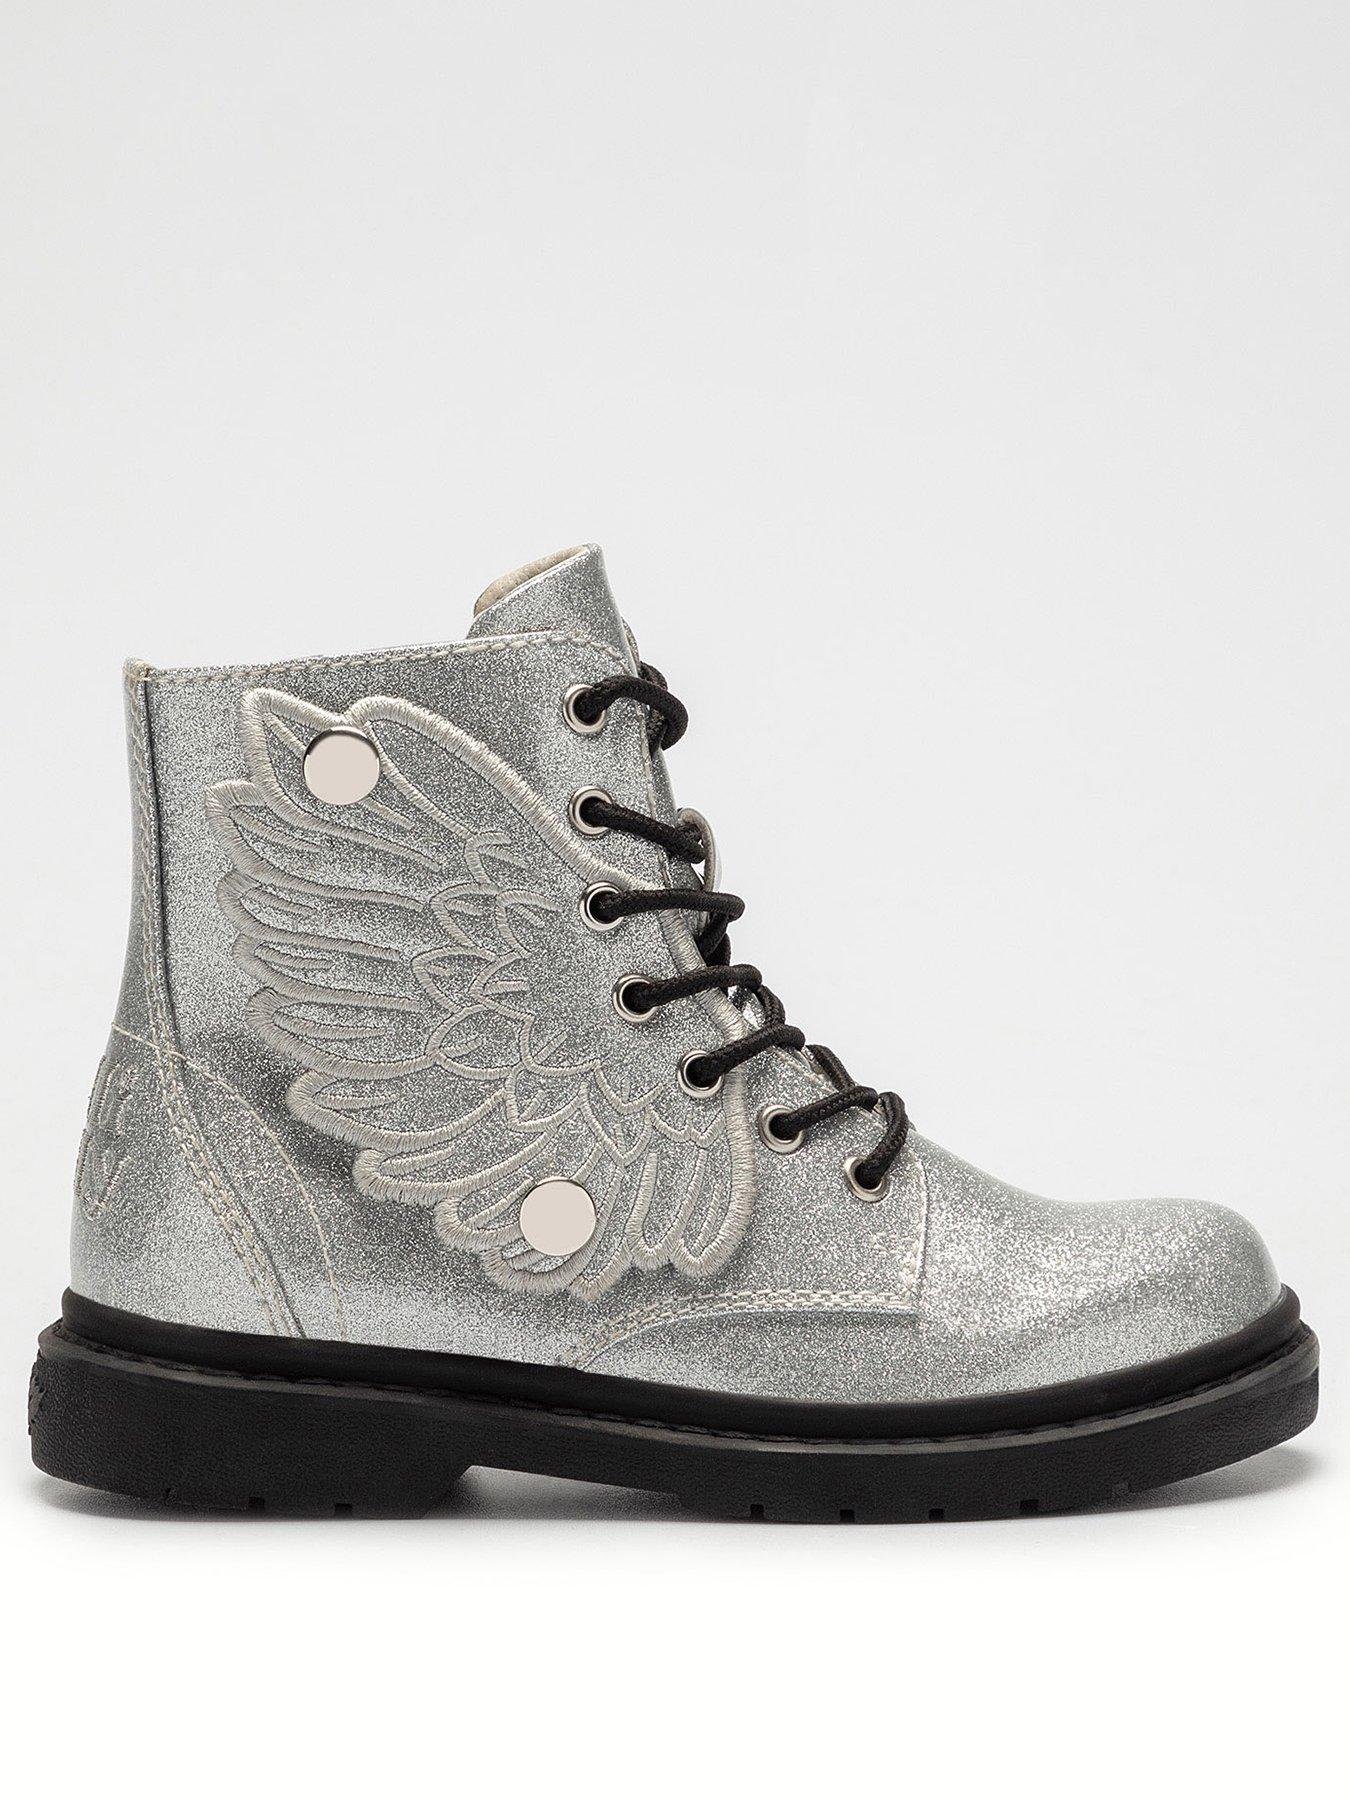  Angel Wings Glitter Ankle Boots - Silver